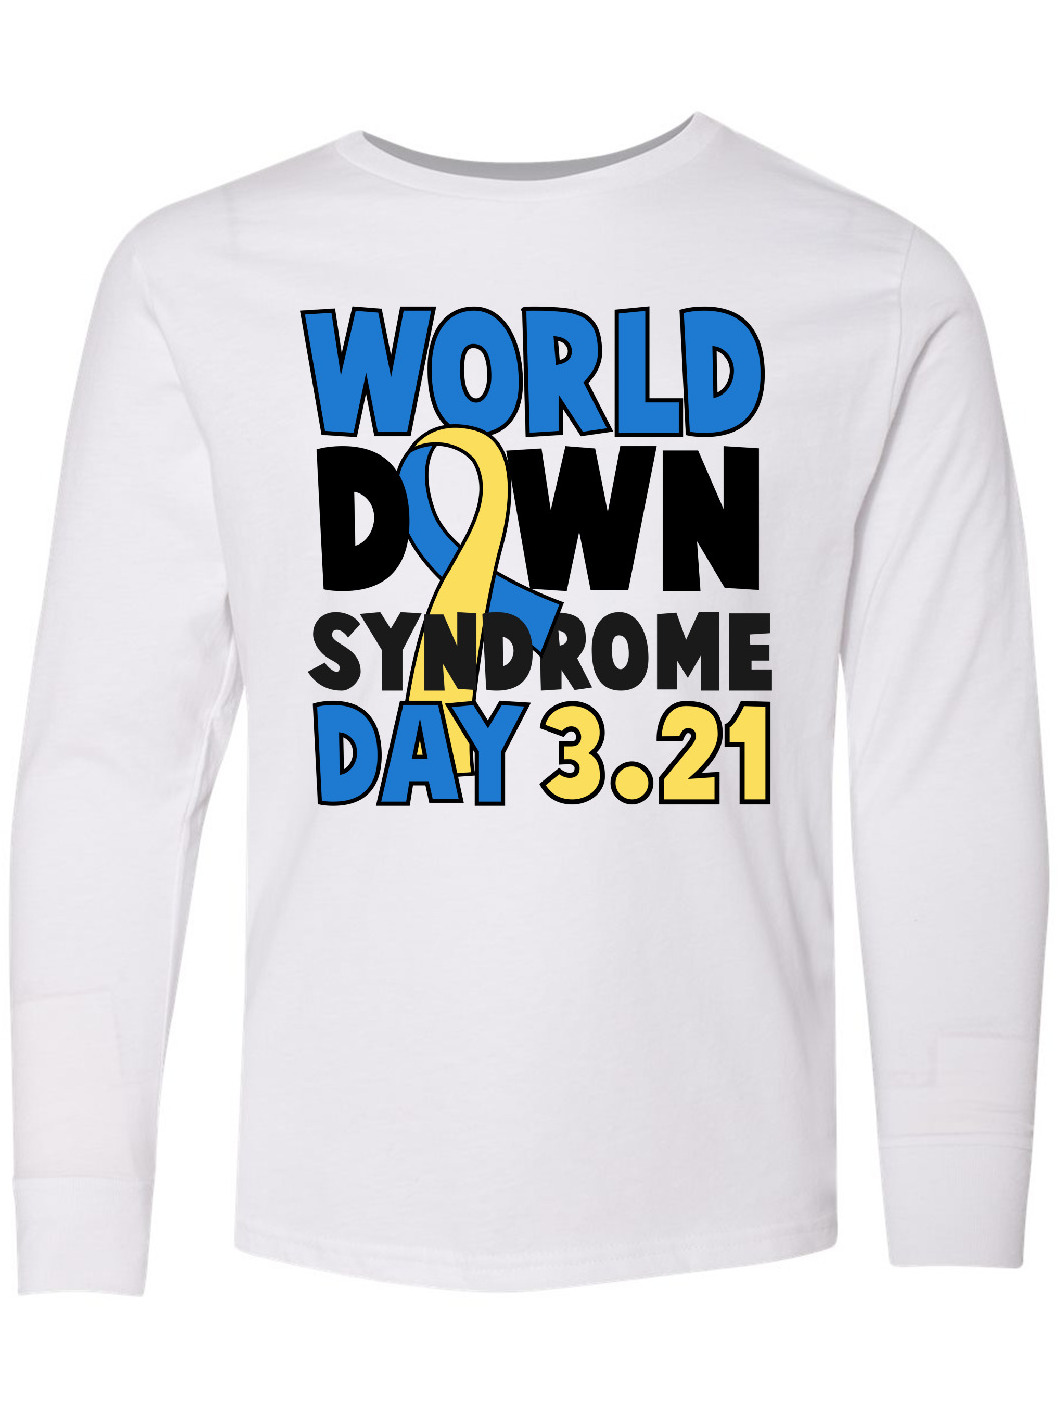 Inktastic World Down Syndome Day 321 Long Sleeve Youth T-Shirt - image 1 of 4